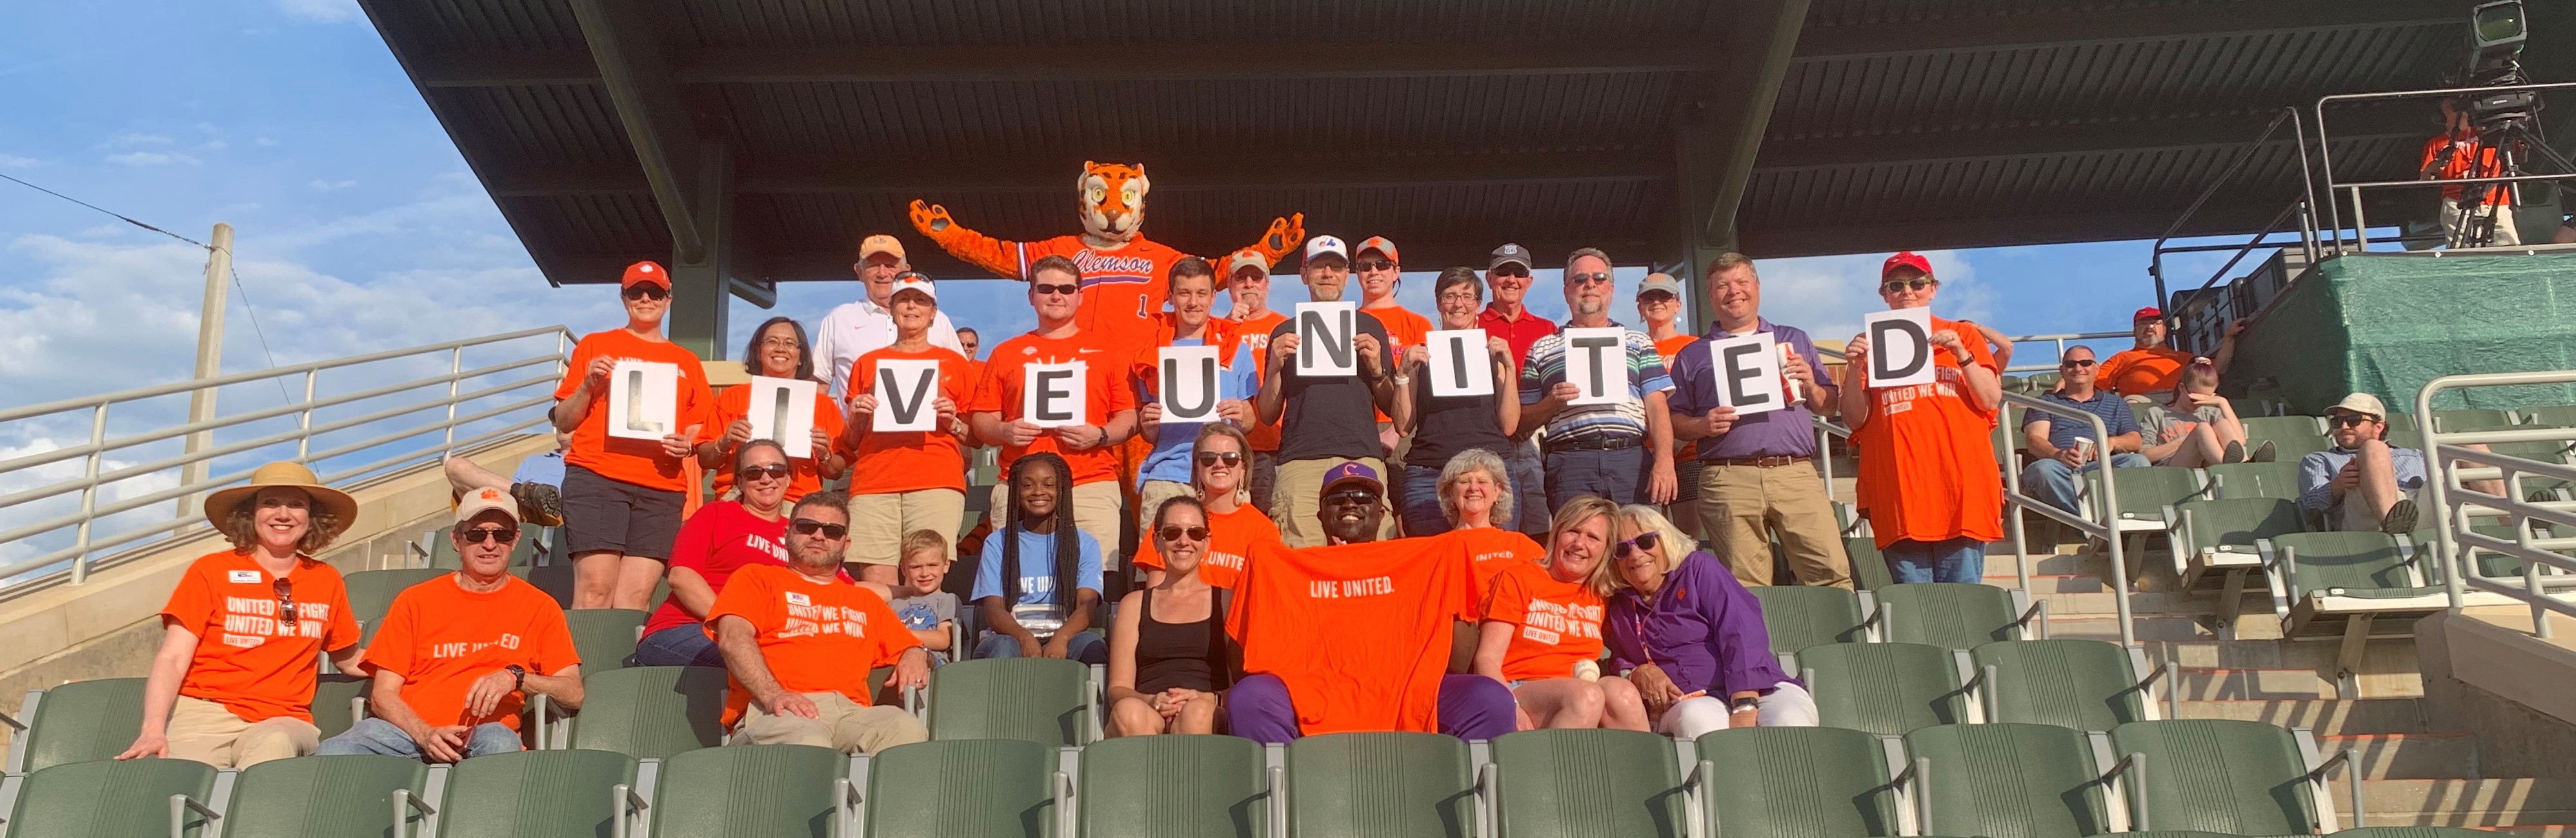 Clemson University employees at baseball game holding Live United sign with Clemson Tiger